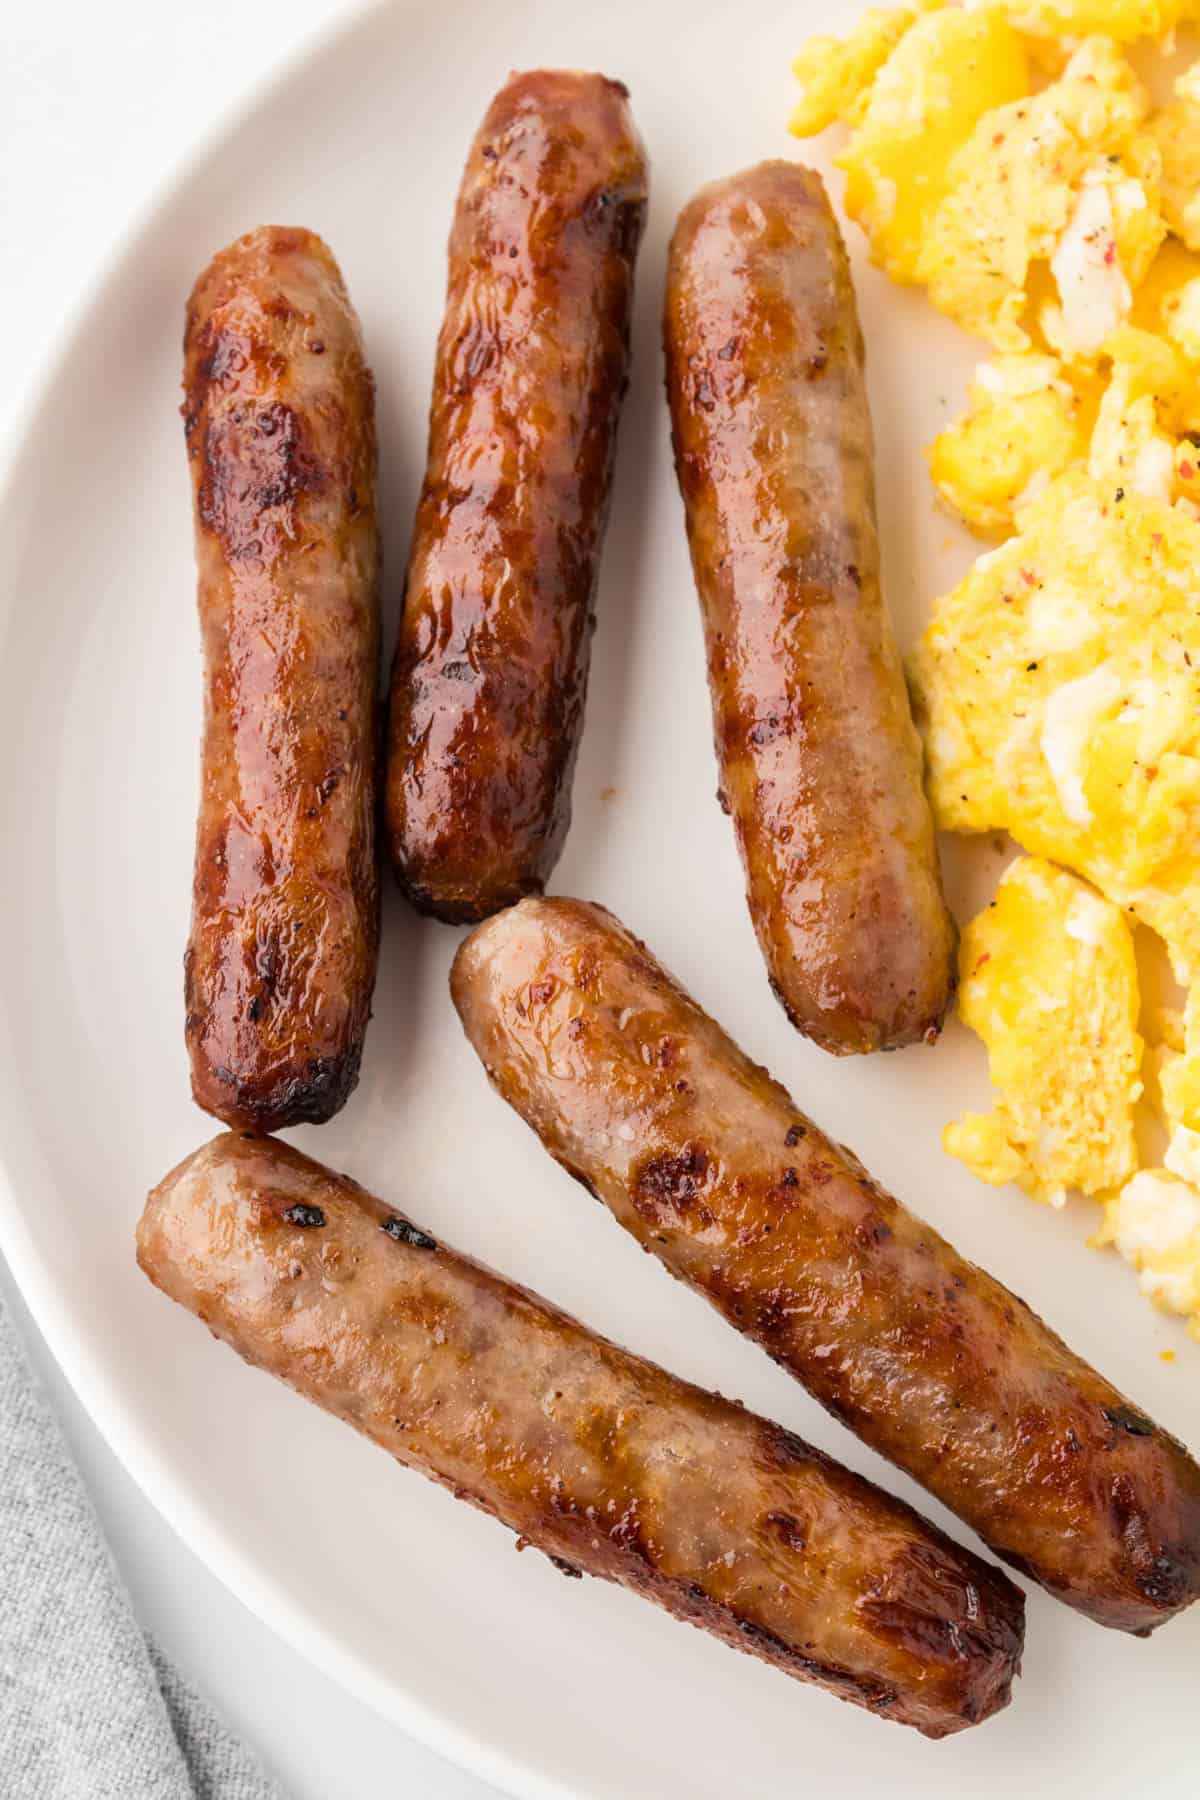 An image of breakfast sausage links on a plate with scrambled eggs.